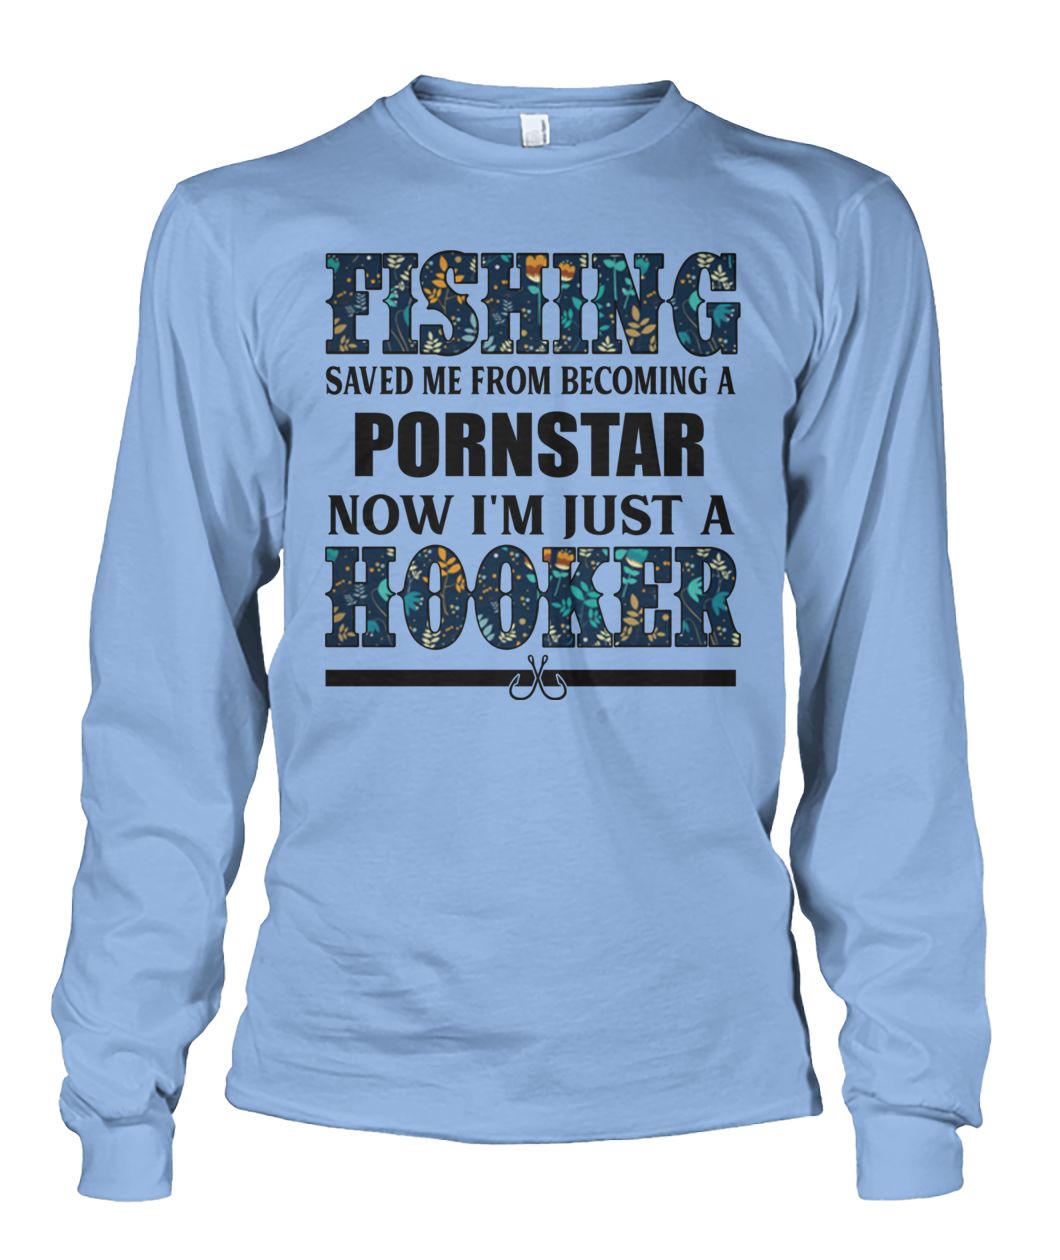 Fishing saved me from being pornstar now I'm just a hooker floral unisex long sleeve